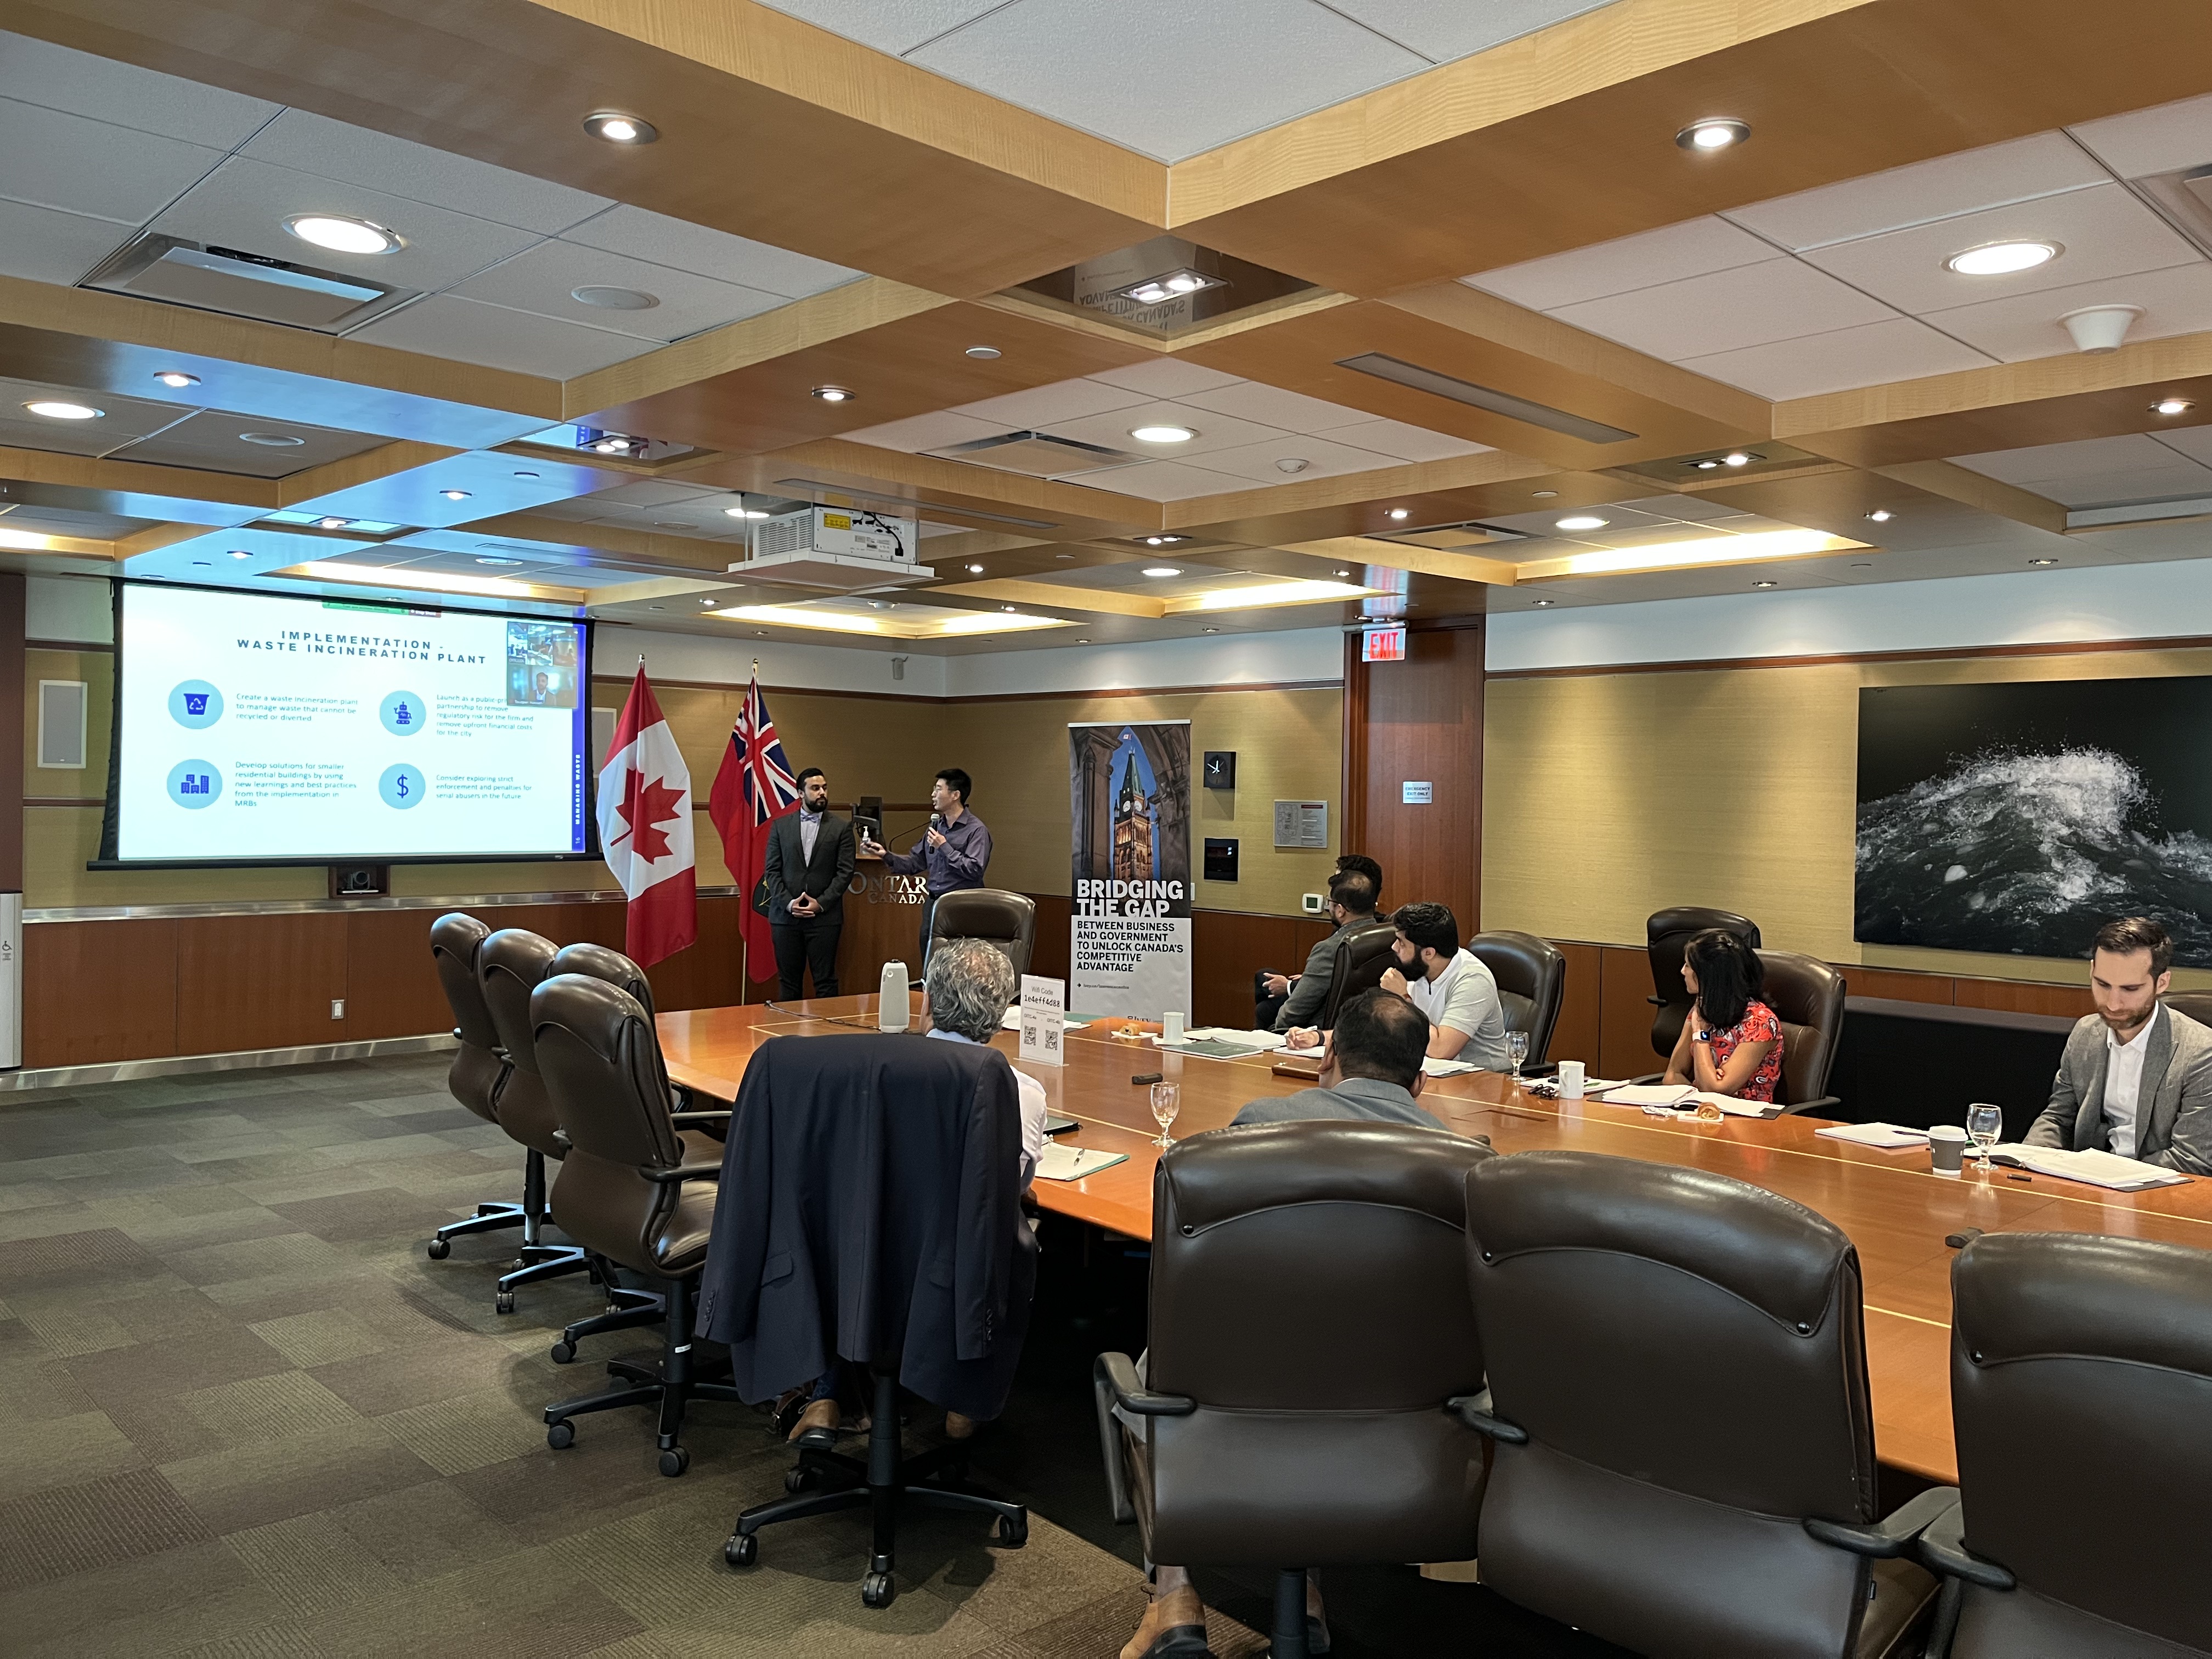 Two students stand at the front of a large boardroom, to the right of a drop down screen. Power point presentation is on the screen, along with a Zoom video of third student participating virtually